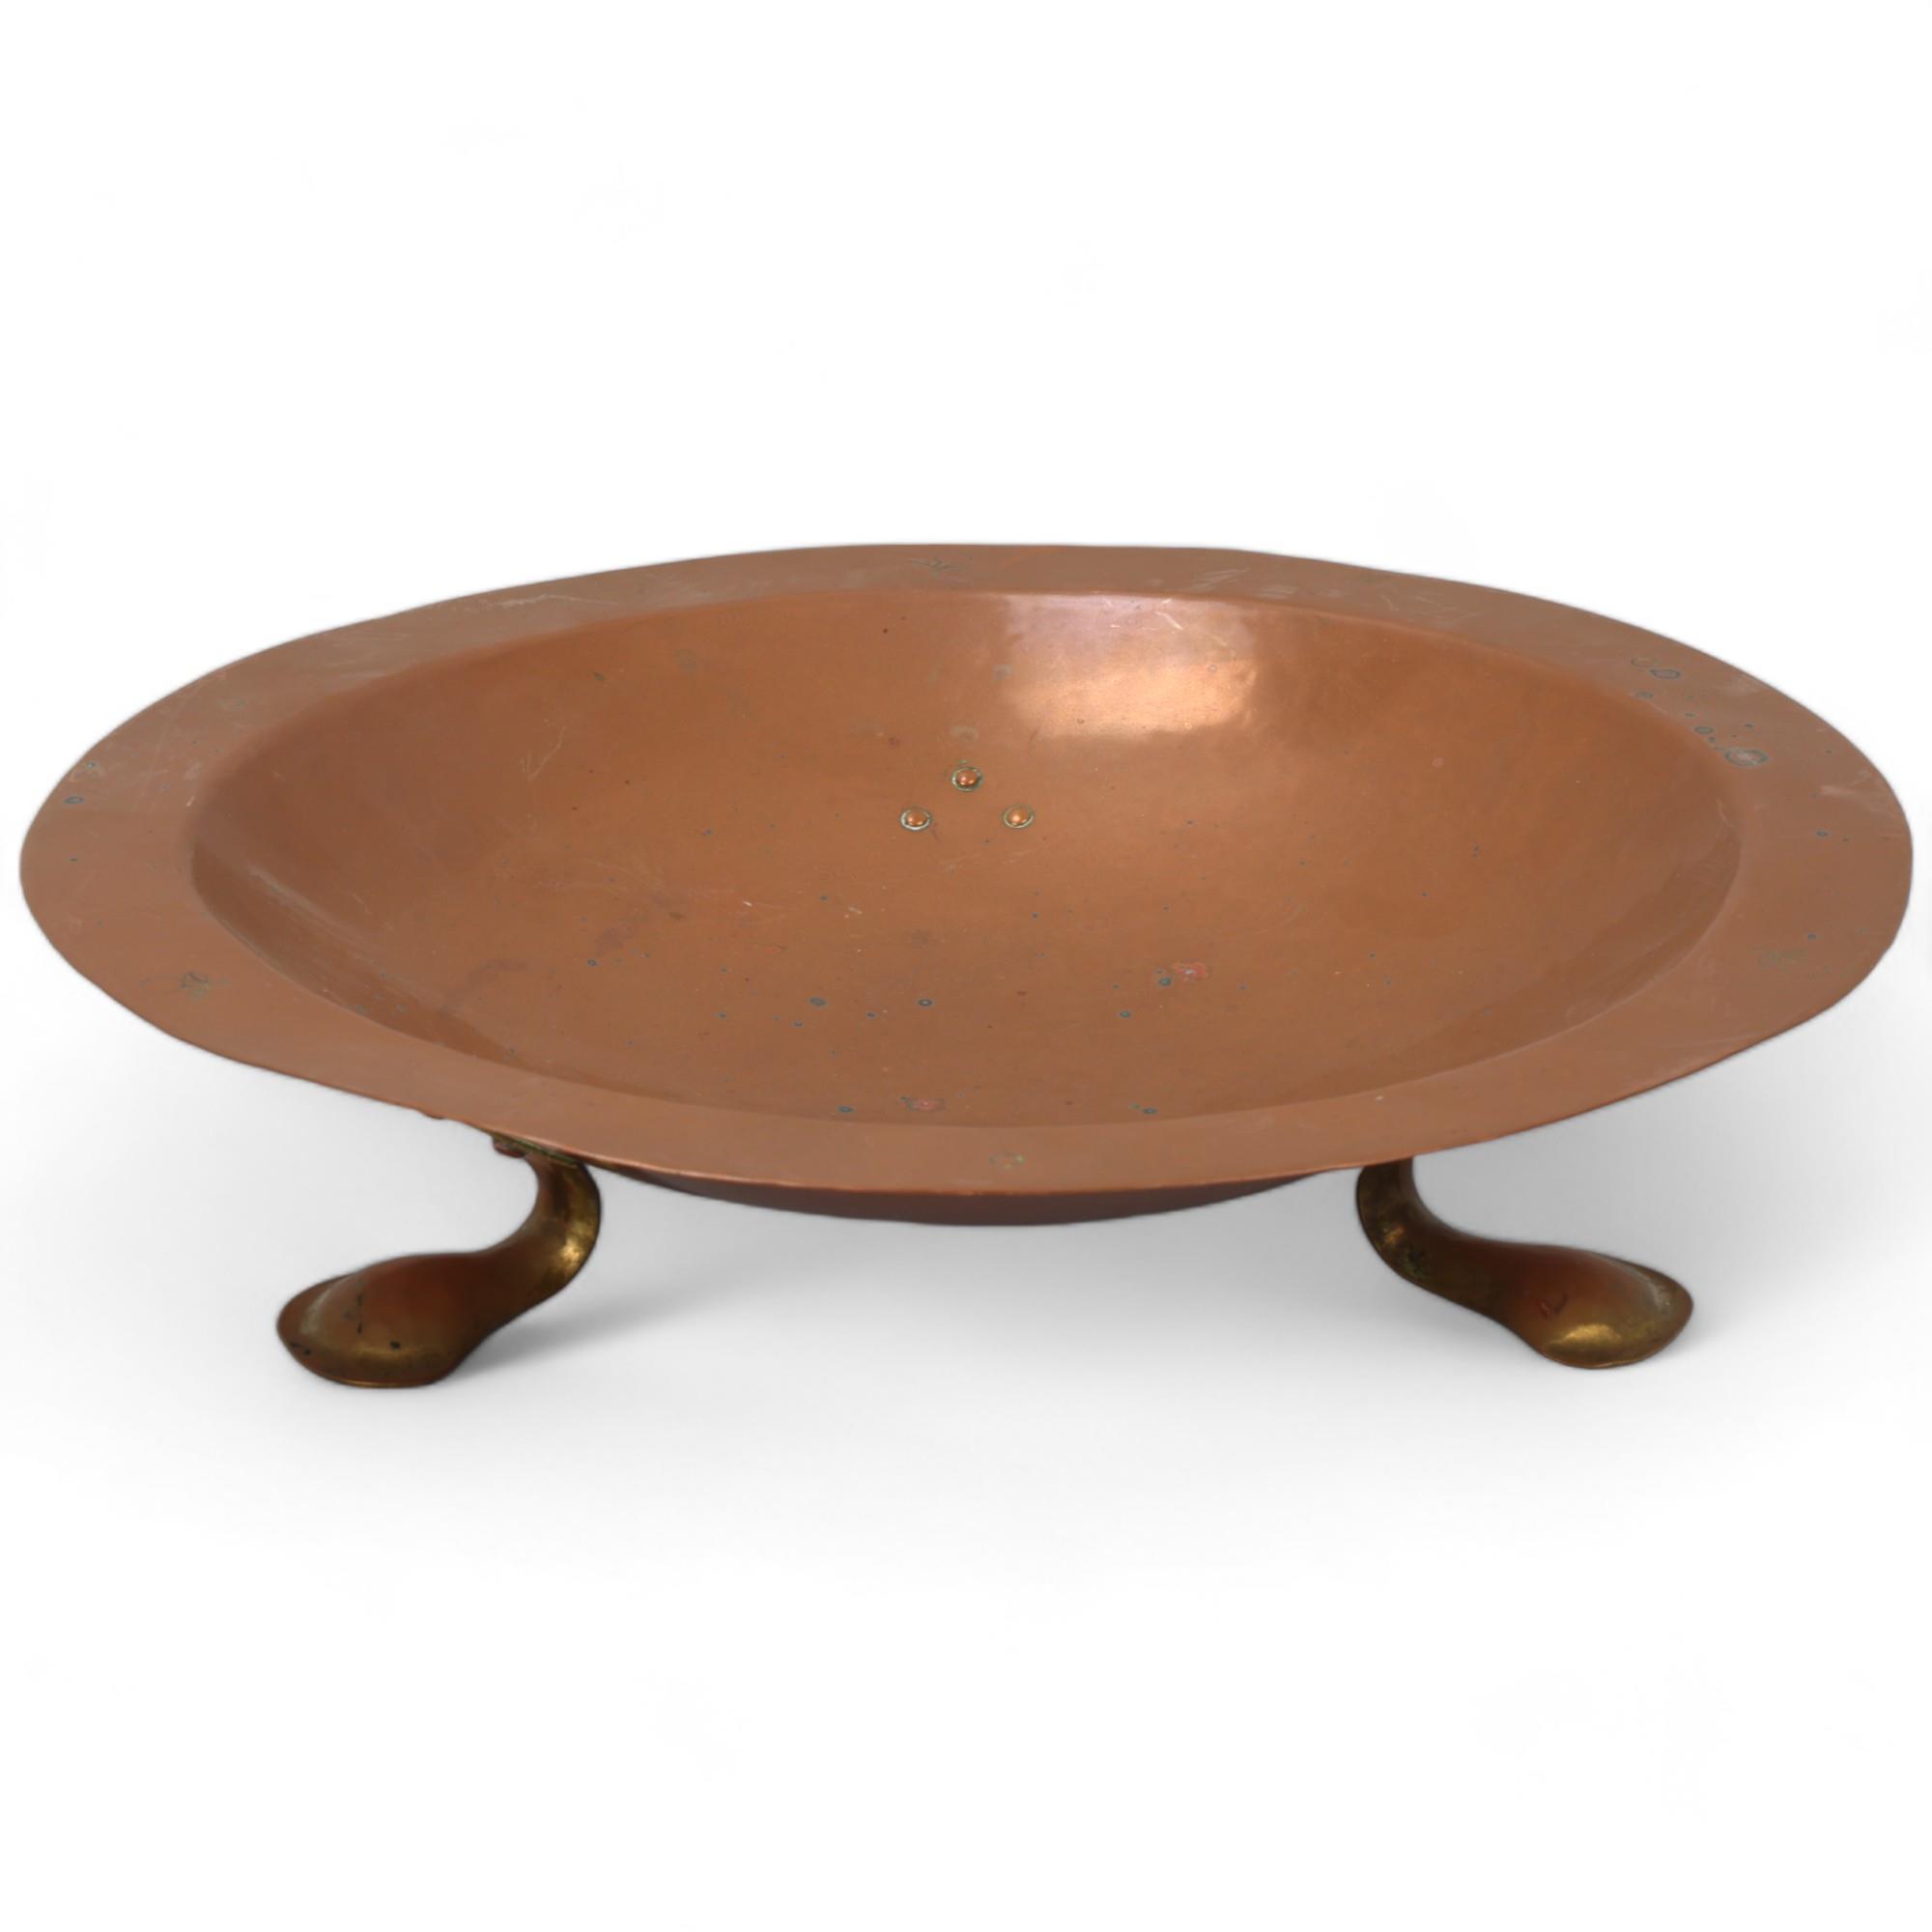 An early 20th century planished copper fruit bowl by the Birmingham Guild Ltd with riveted brass